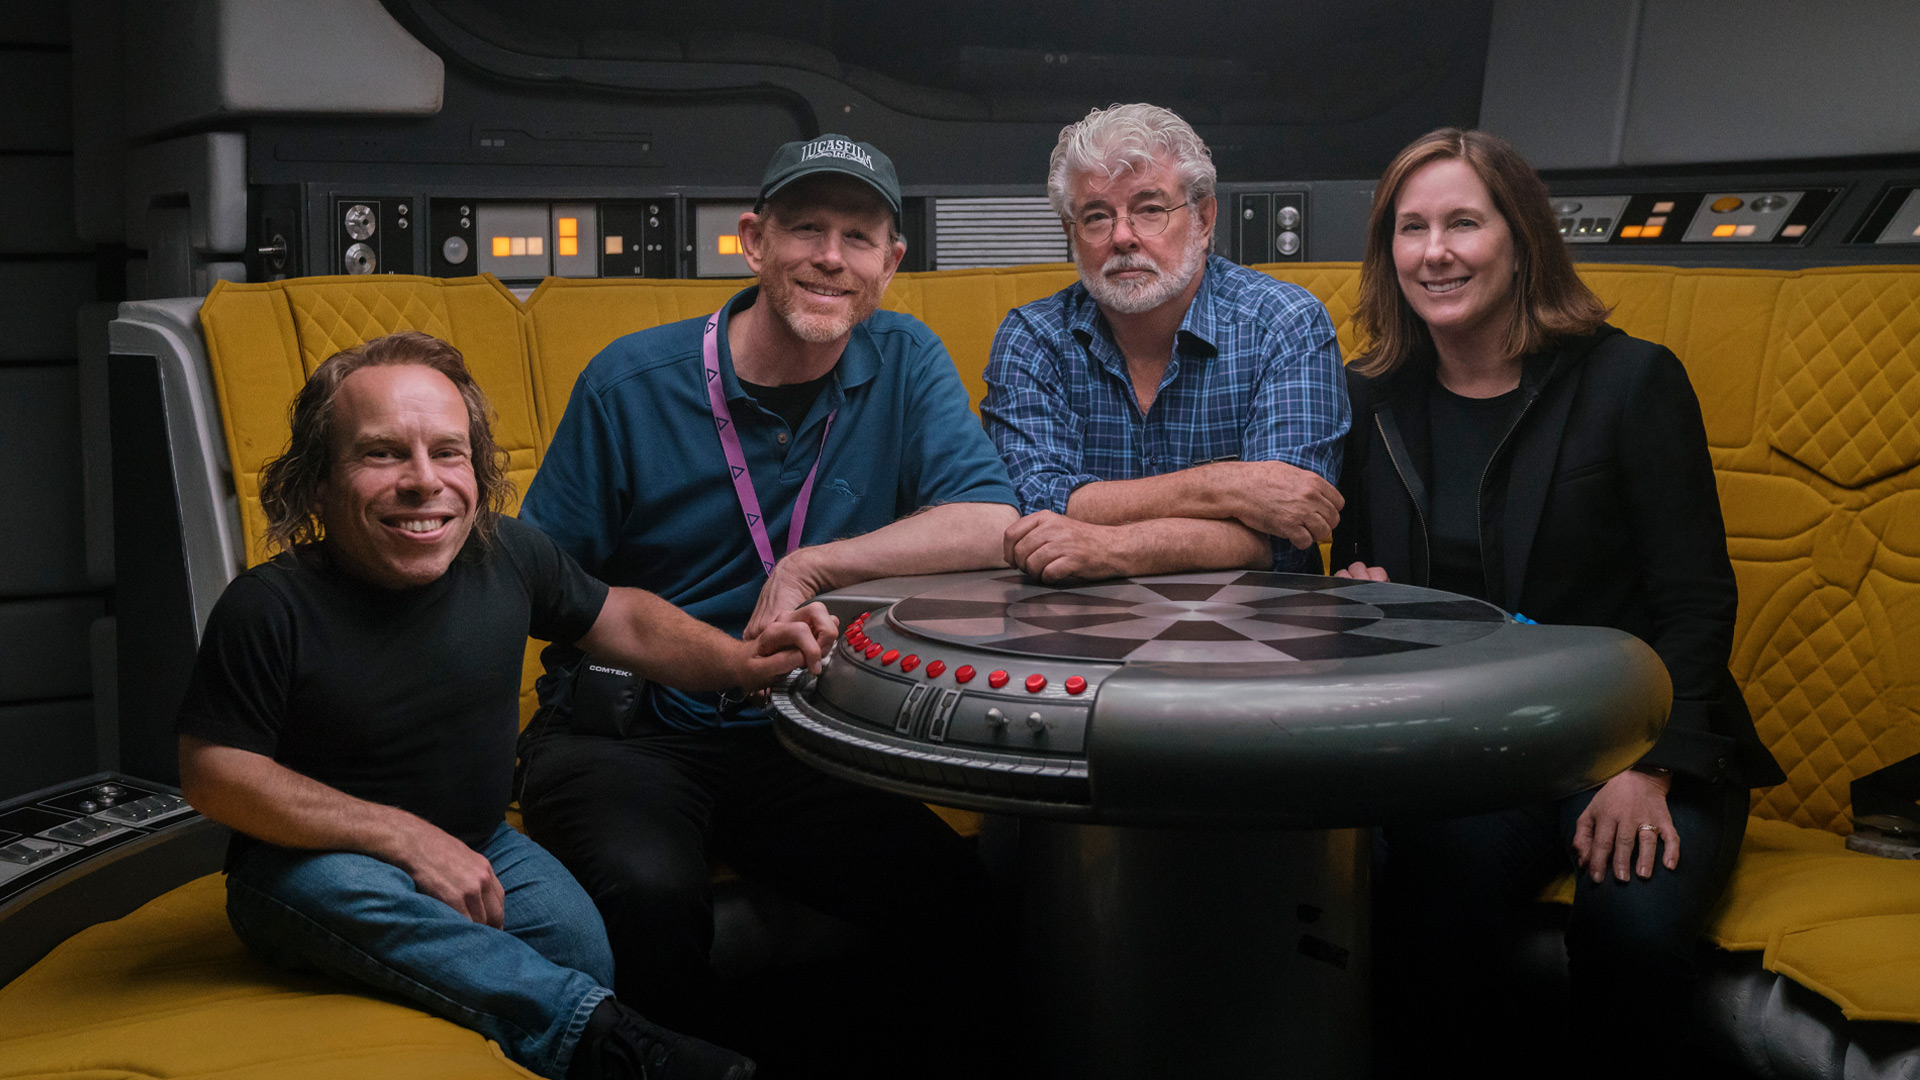 Warwick Davis, Ron Howard, George Lucas, and Kathleen Kennedy on the set of the Falcon